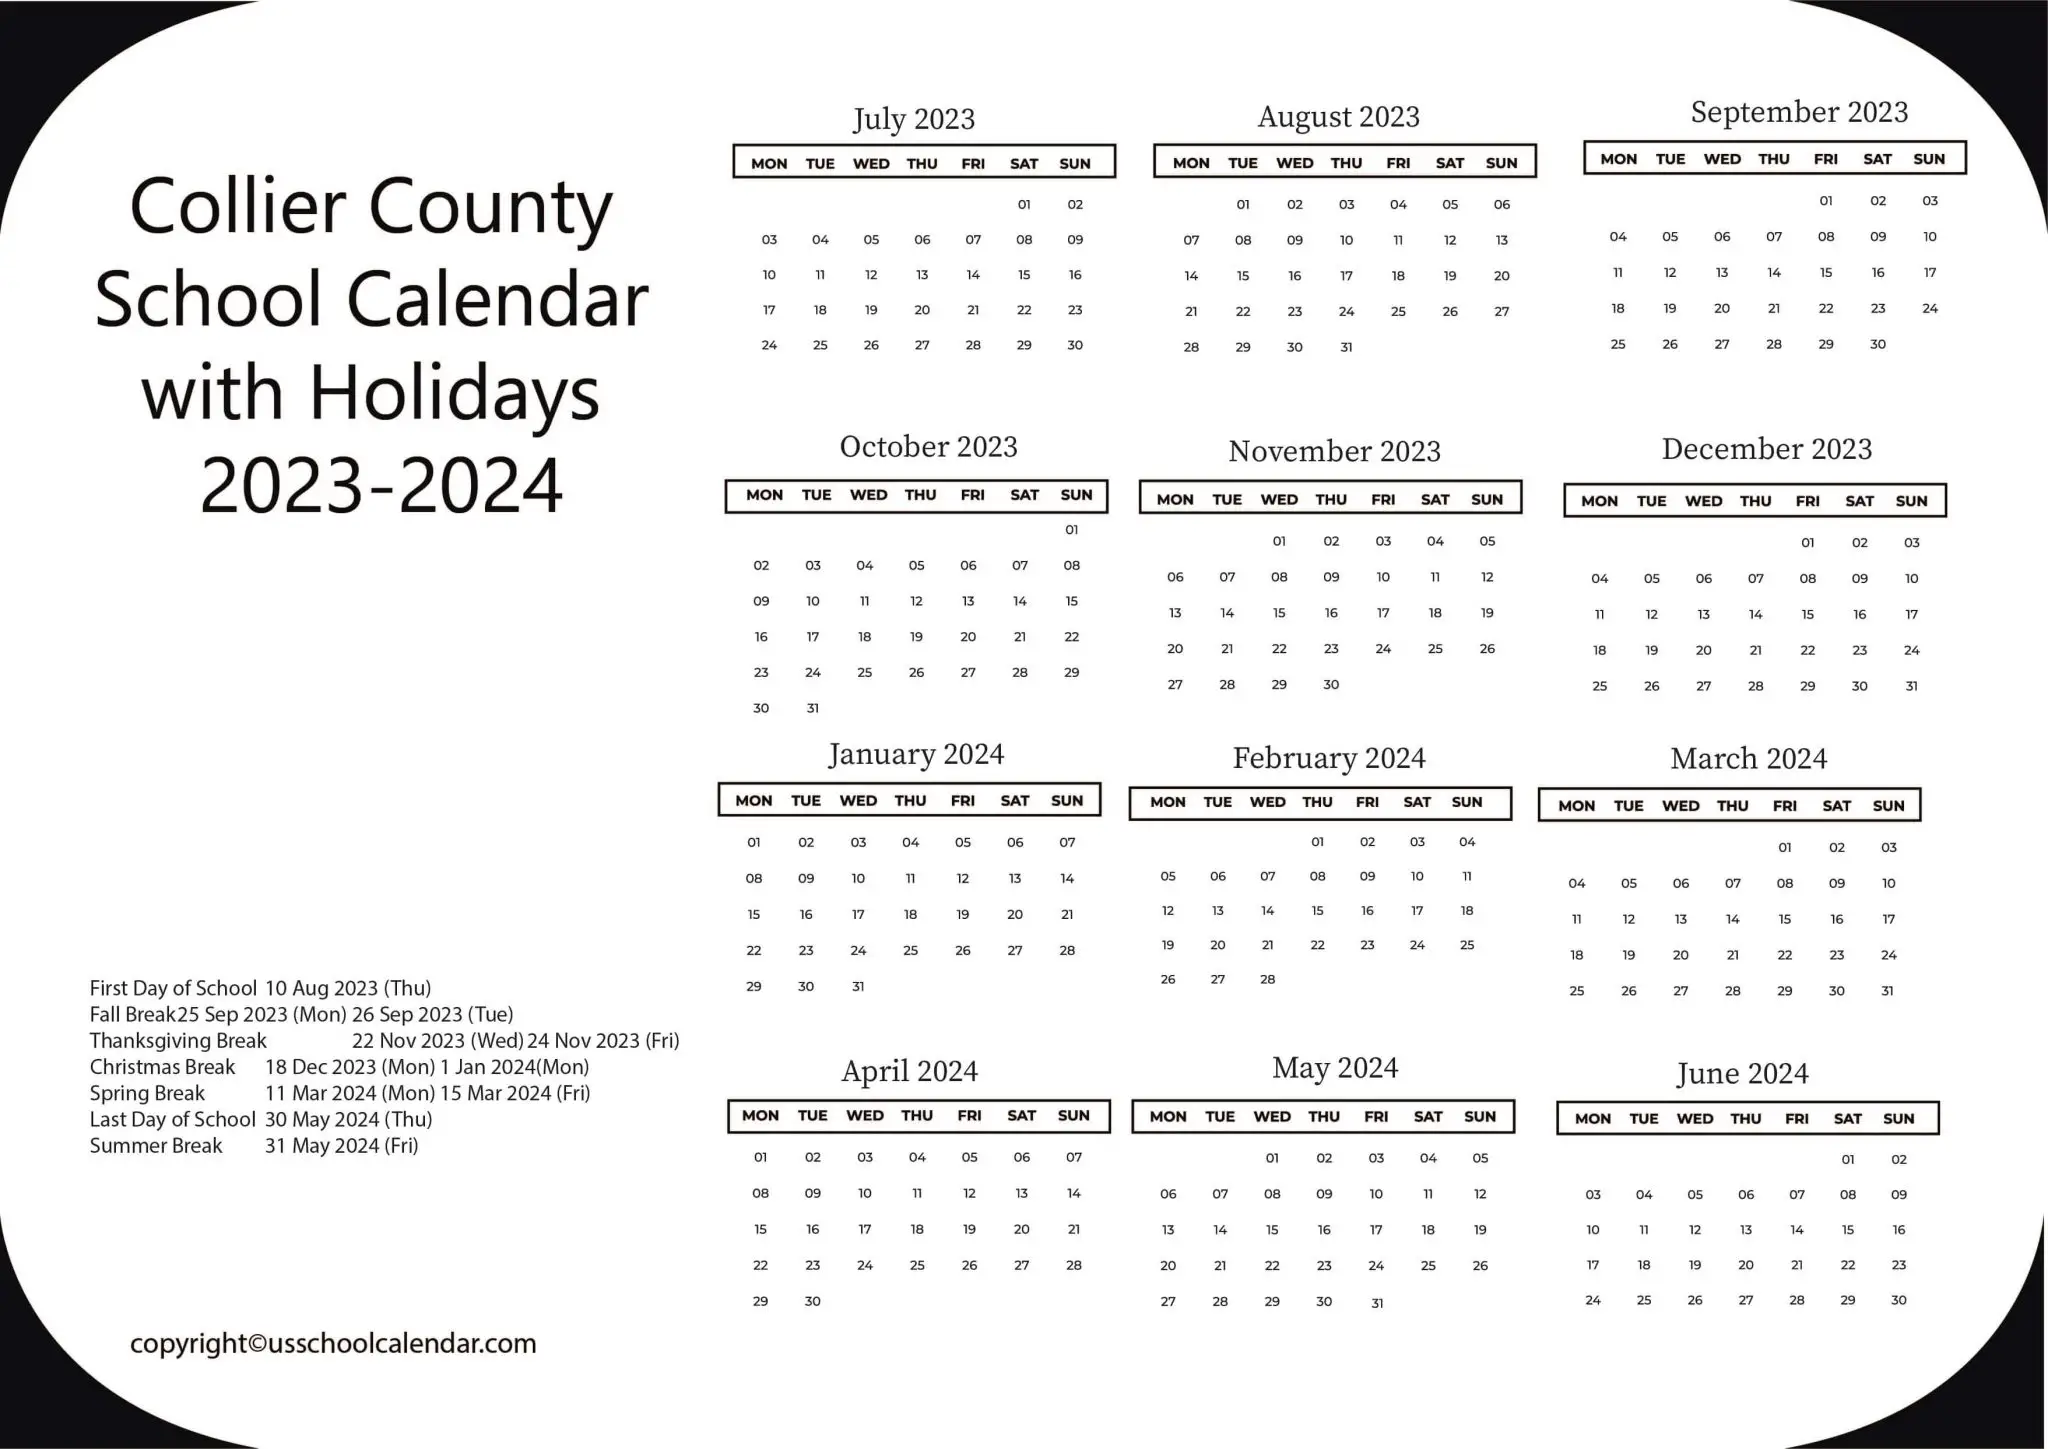 collier-county-school-calendar-with-holidays-2023-2024